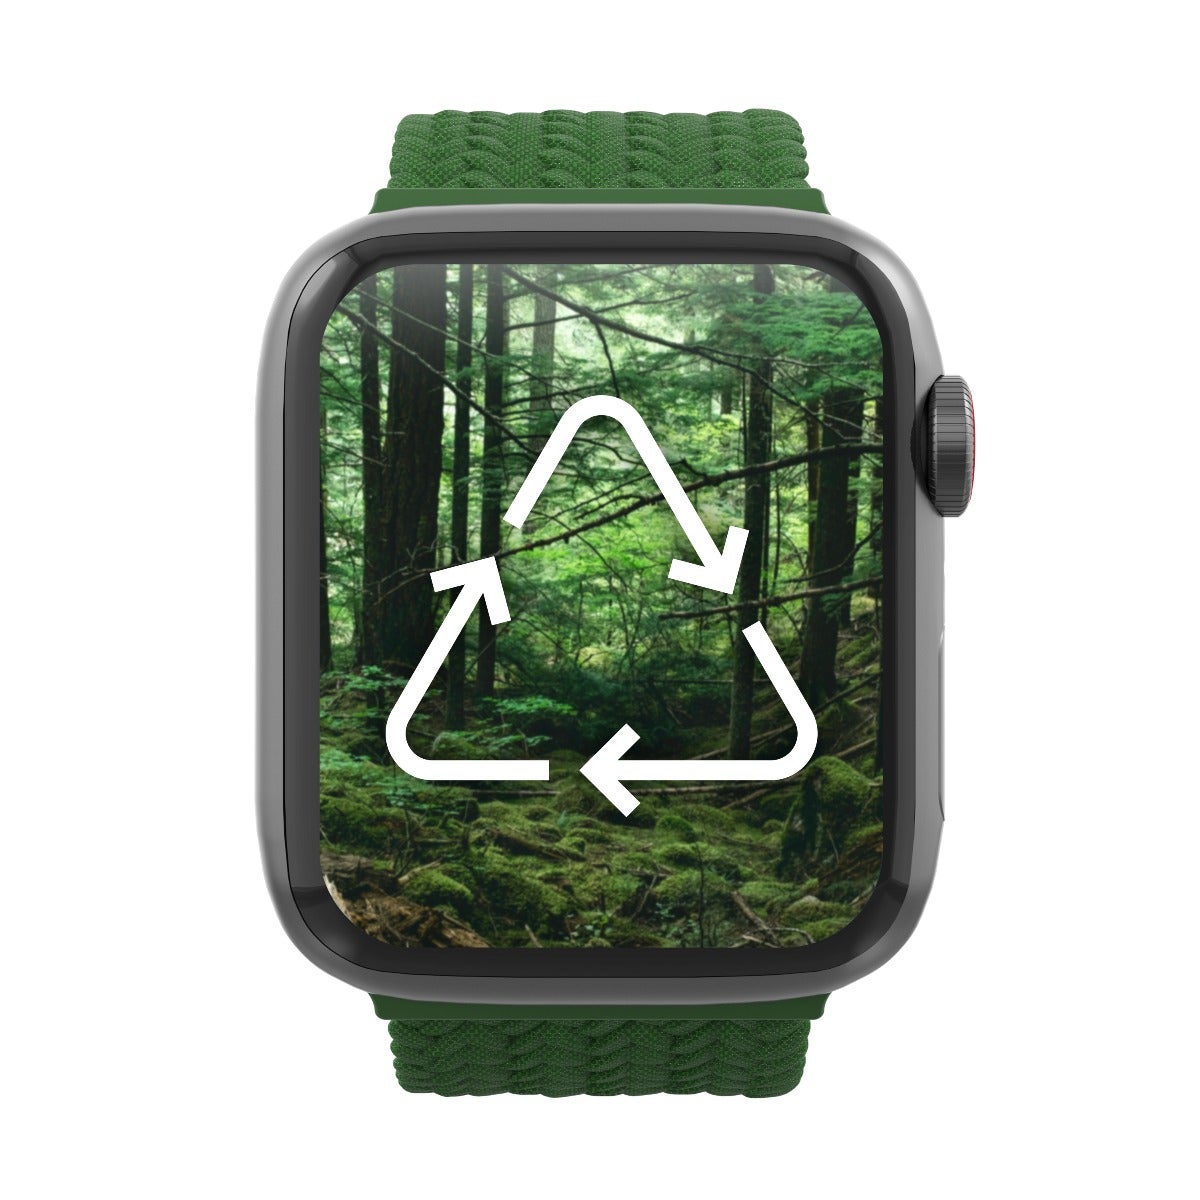 Nylon Contains Recycled Materials||The nylon band is constructed with some post-consumer recycled nylon.